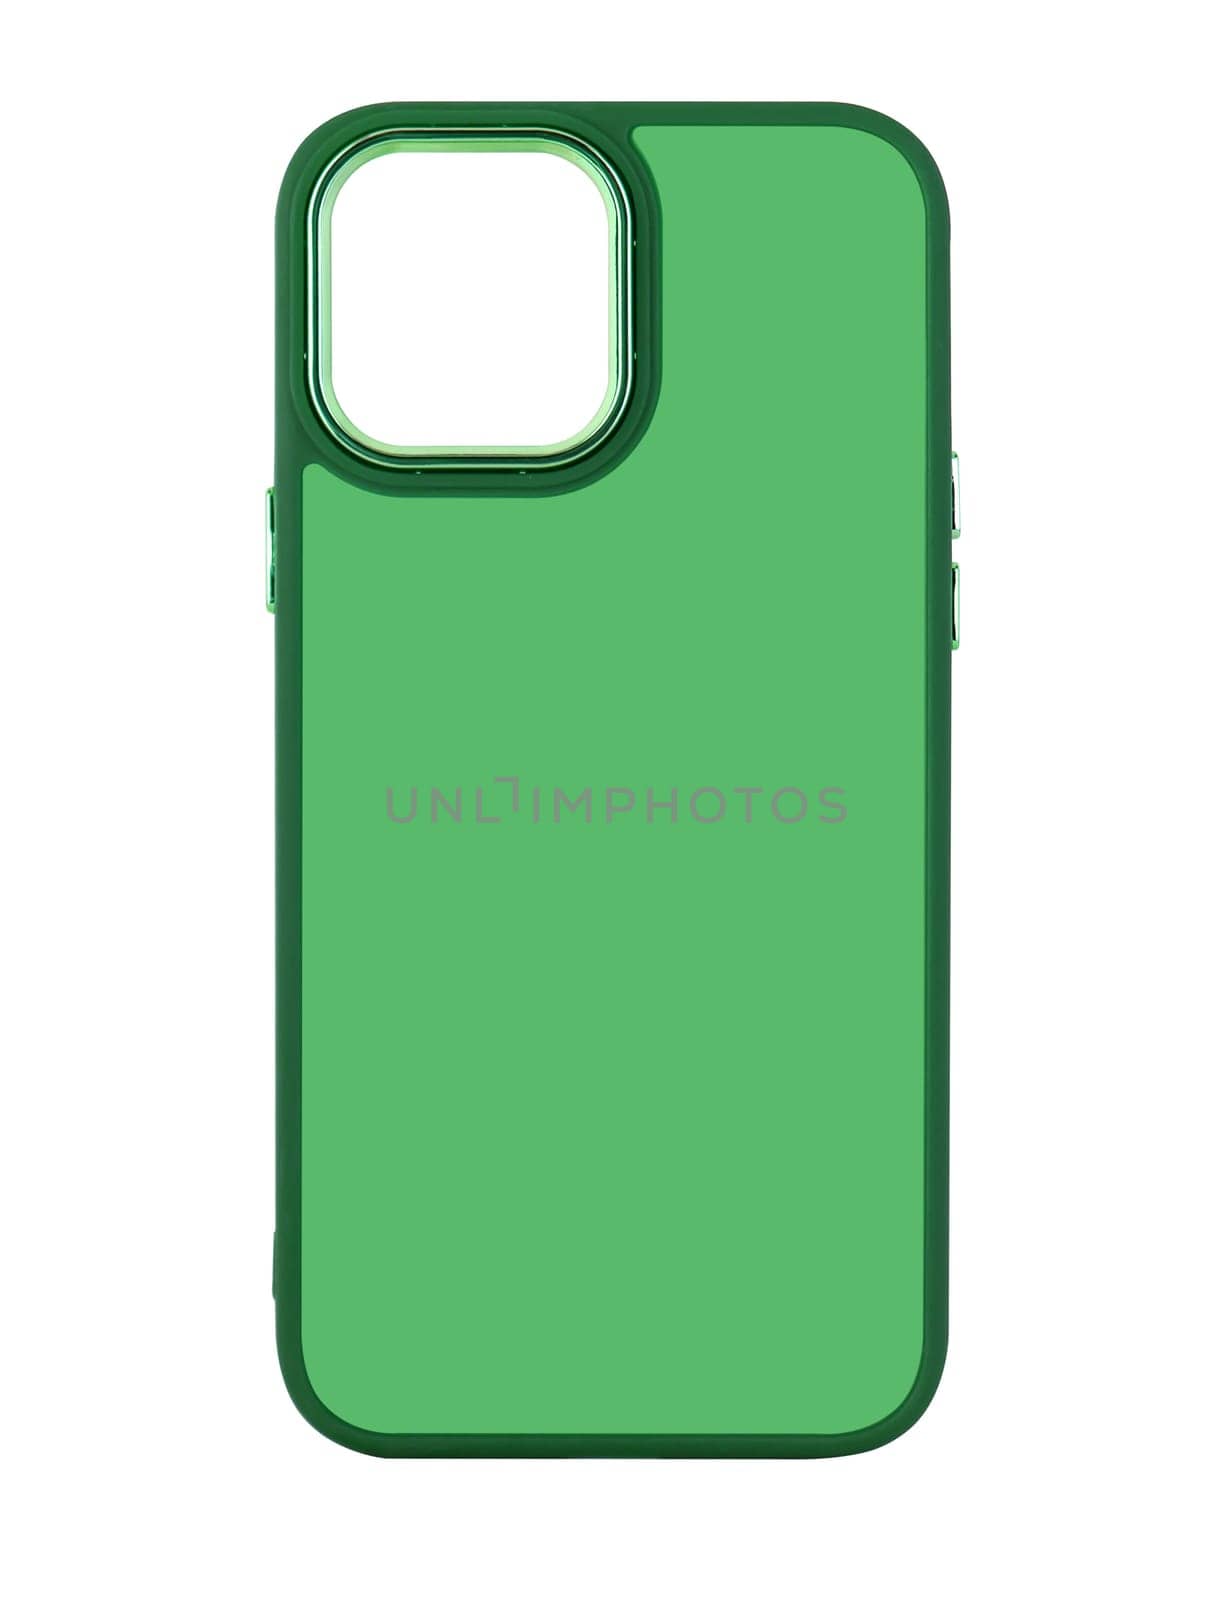 Silicone phone case on white background in insulation by A_A